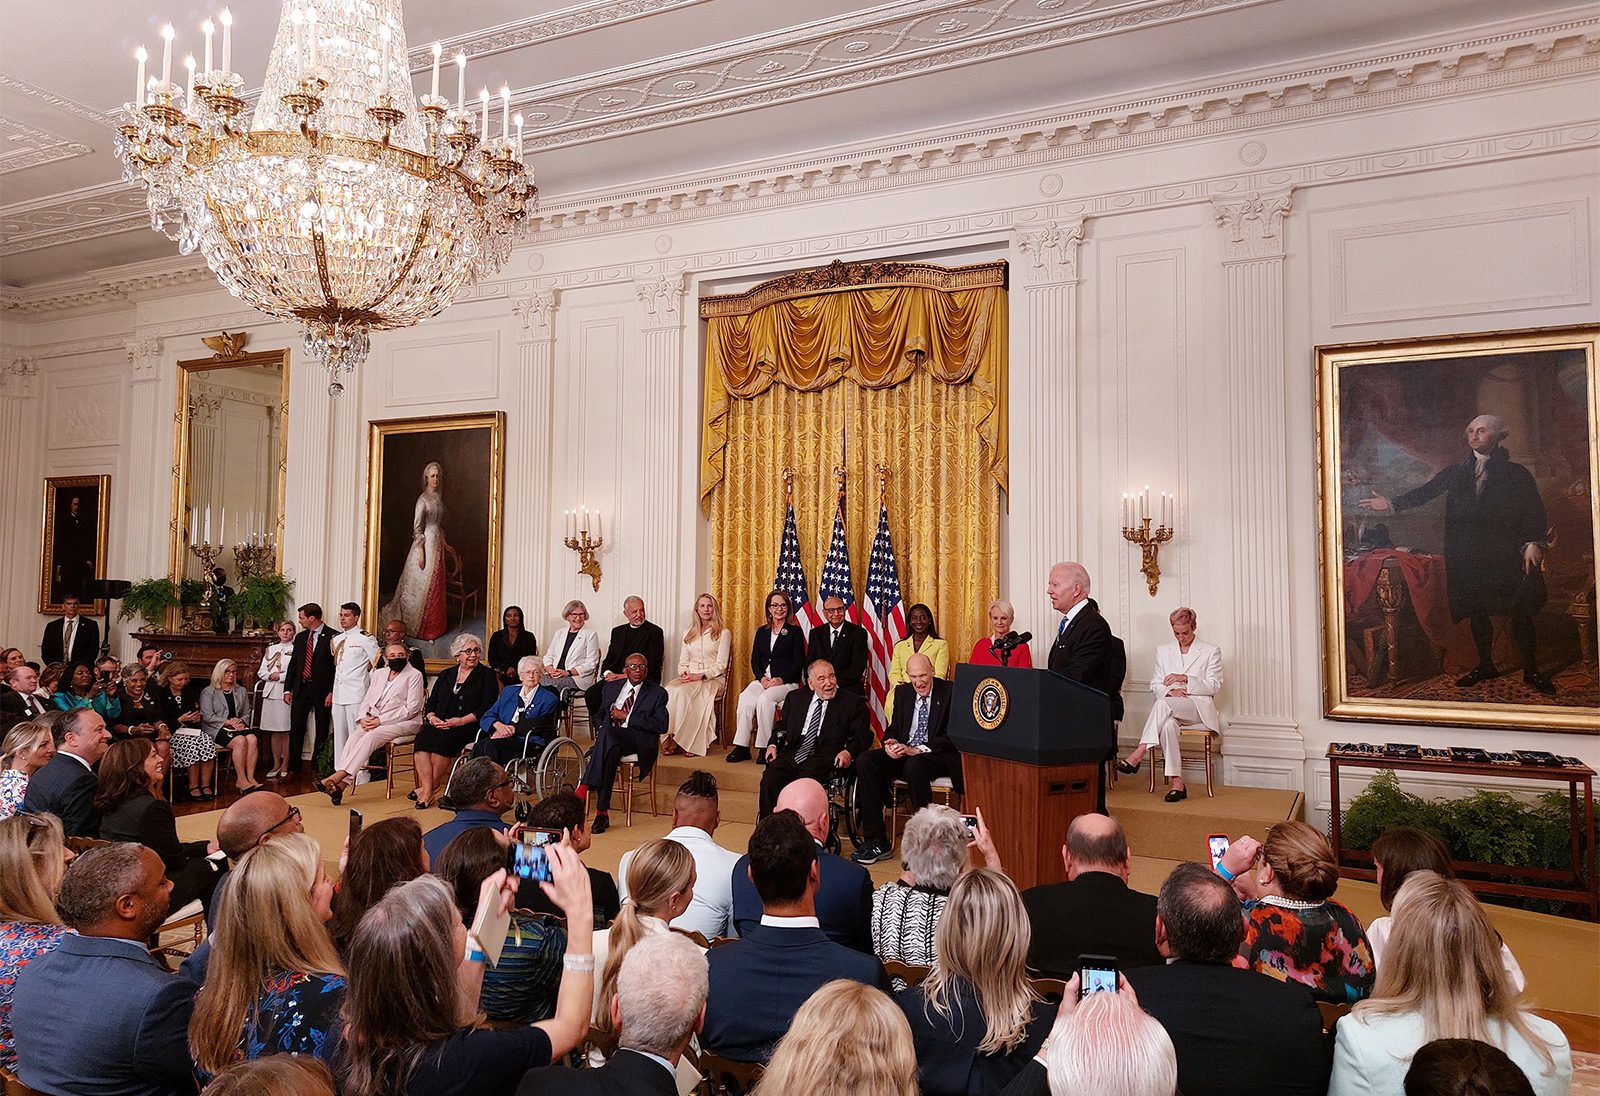 President Joe Biden, at podium, speaks before he awards the Presidential Medal of Freedom to honorees at the White House in Washington, Thursday, July 7, 2022. RNS photo by Adelle M. Banks